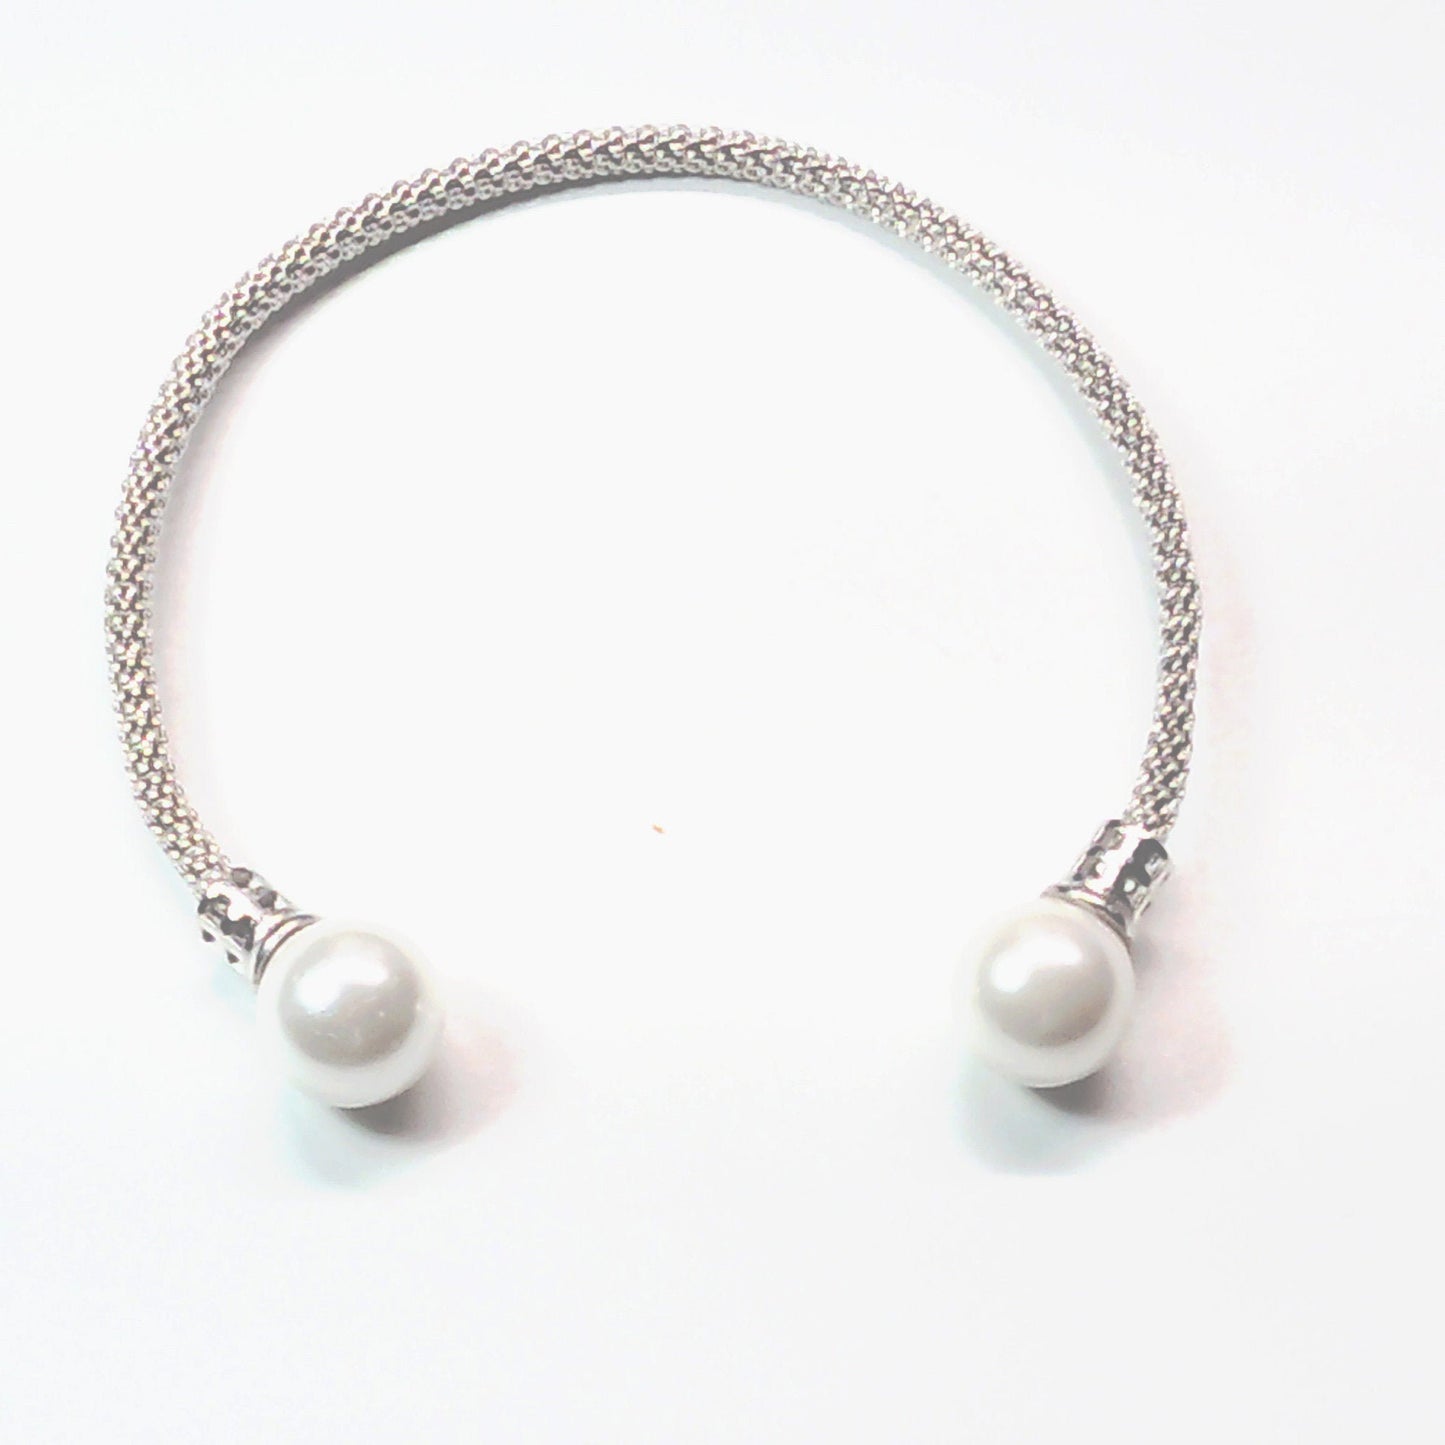 sterling silver mesh bracelet with genuine fresh water pearls - Providence silver gold jewelry usa